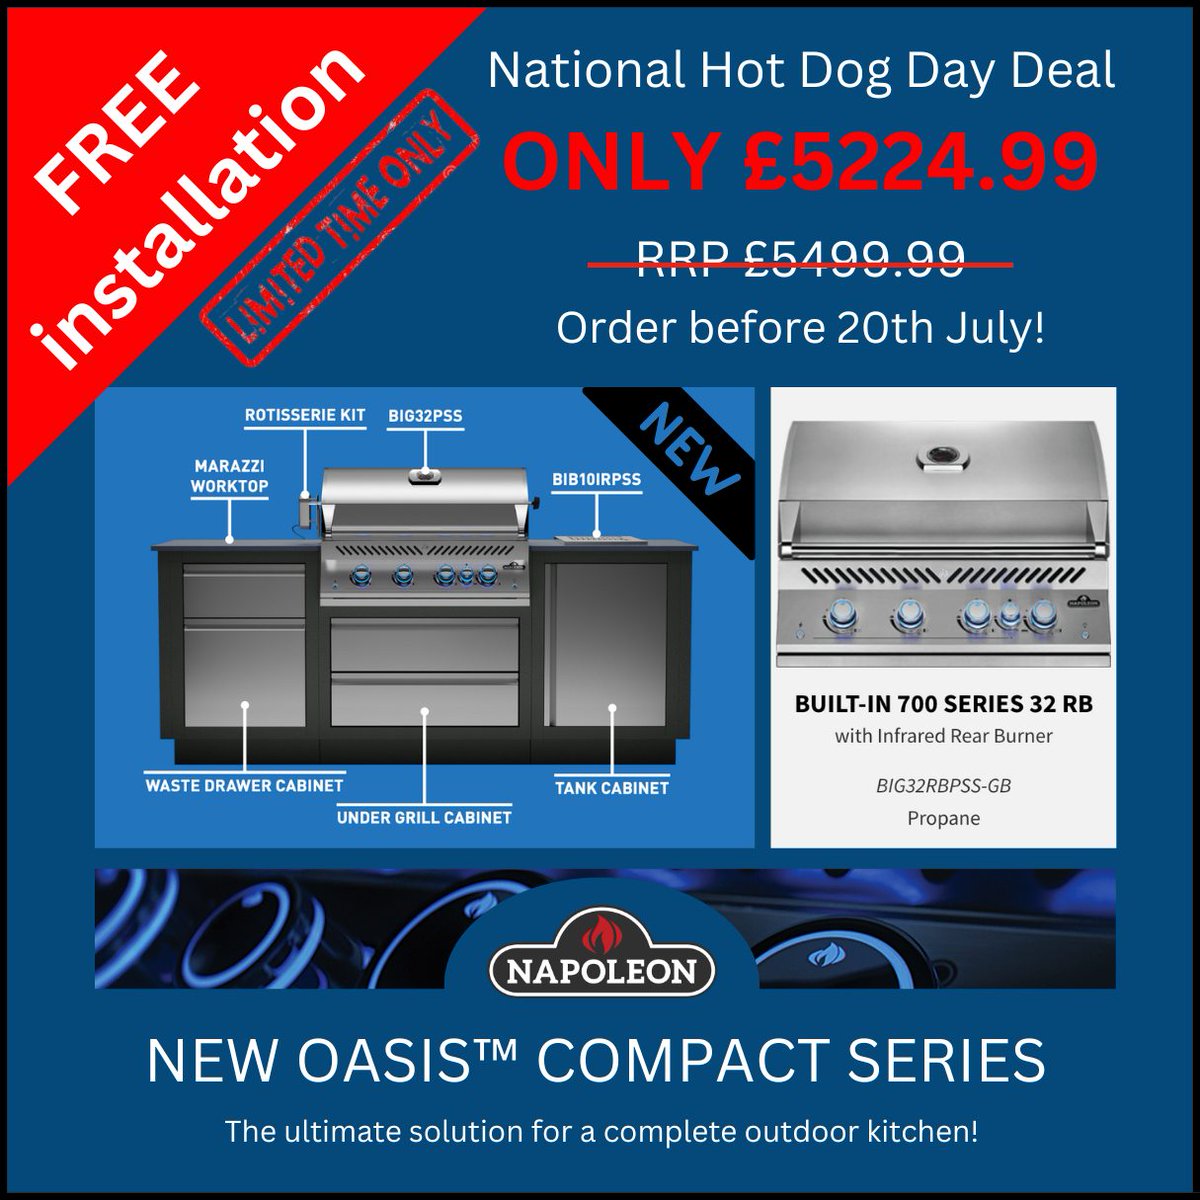 🚨LIMITED TIME OFFER 🚨

For a limited time only grab the incredible Napoleon Oasis Compact for just £5224.99, including FREE installation! 🤯🔥

The Napoleon Oasis Compact is everything you need and more to become the ultimate grill master 🤩🥩

#limitedoffer #outdoorkitchen